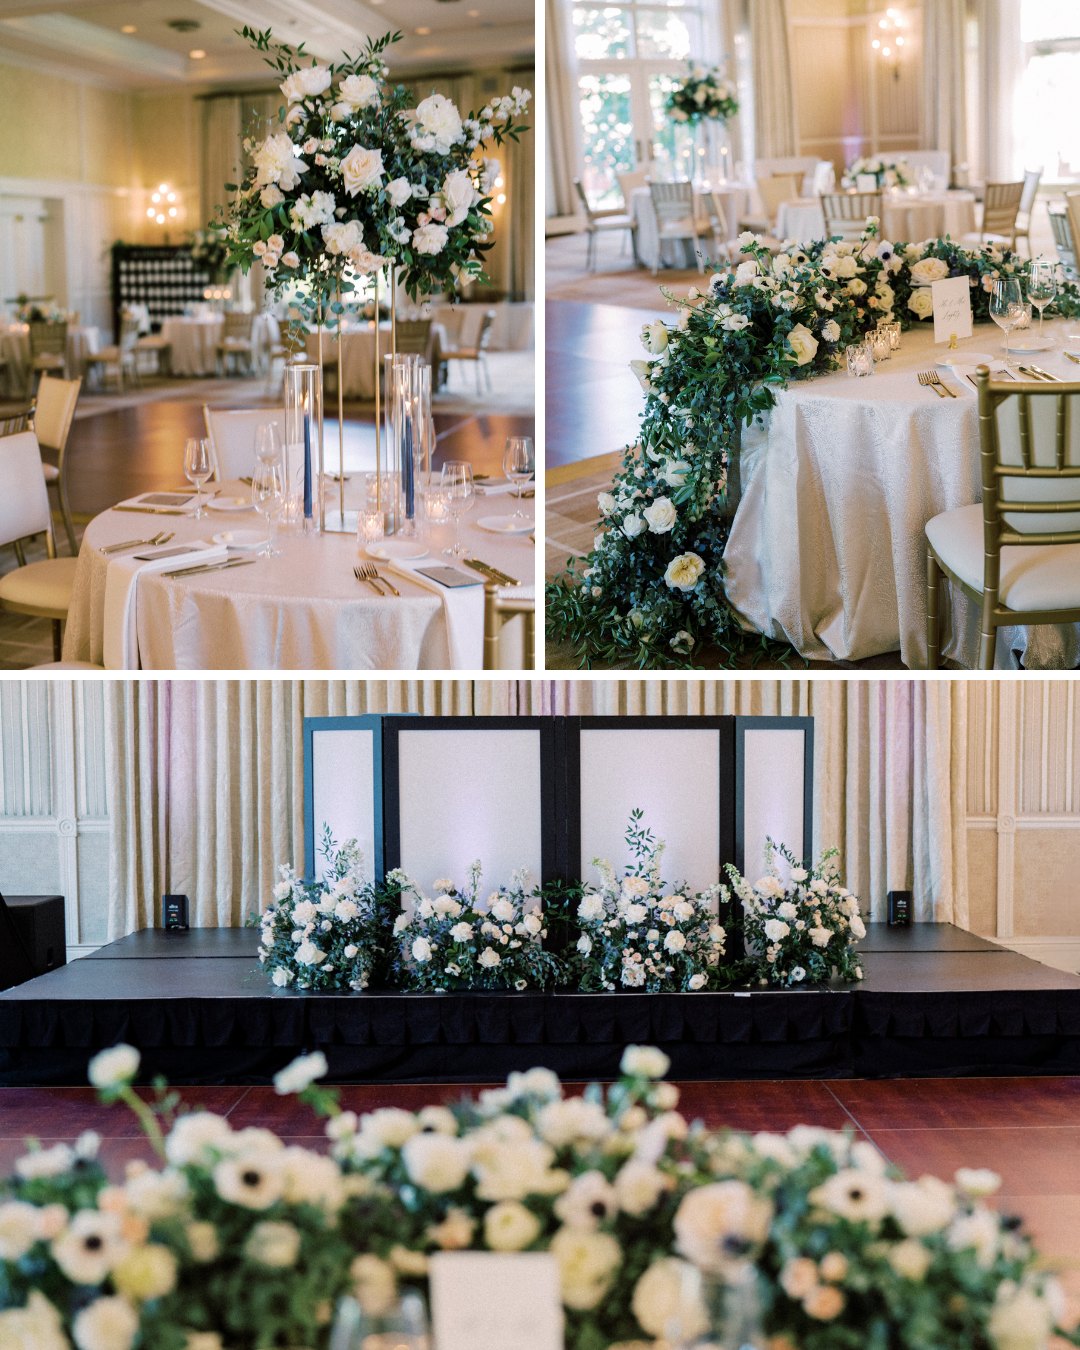 collage of wedding reception with white linens and greenery inside a ballroom